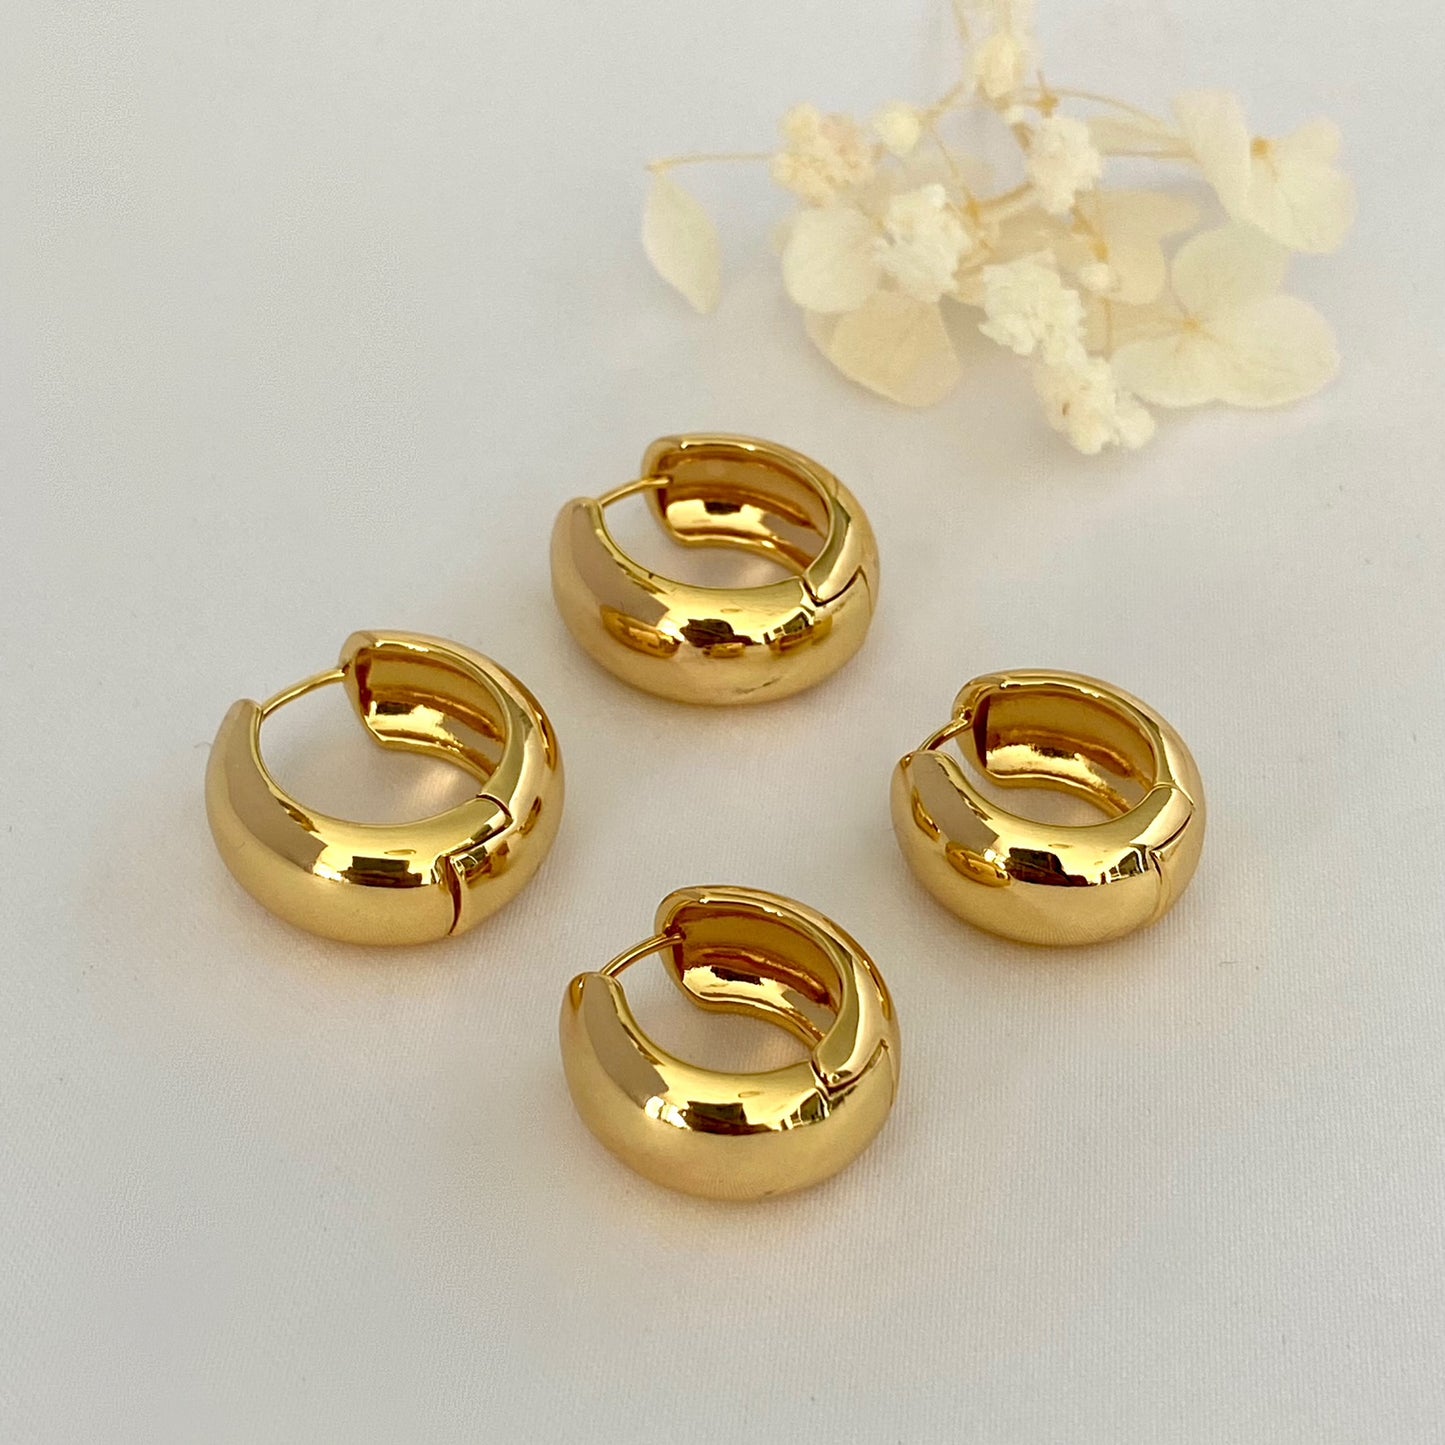 1cm Thick Chunky Gold Hoop Earrings